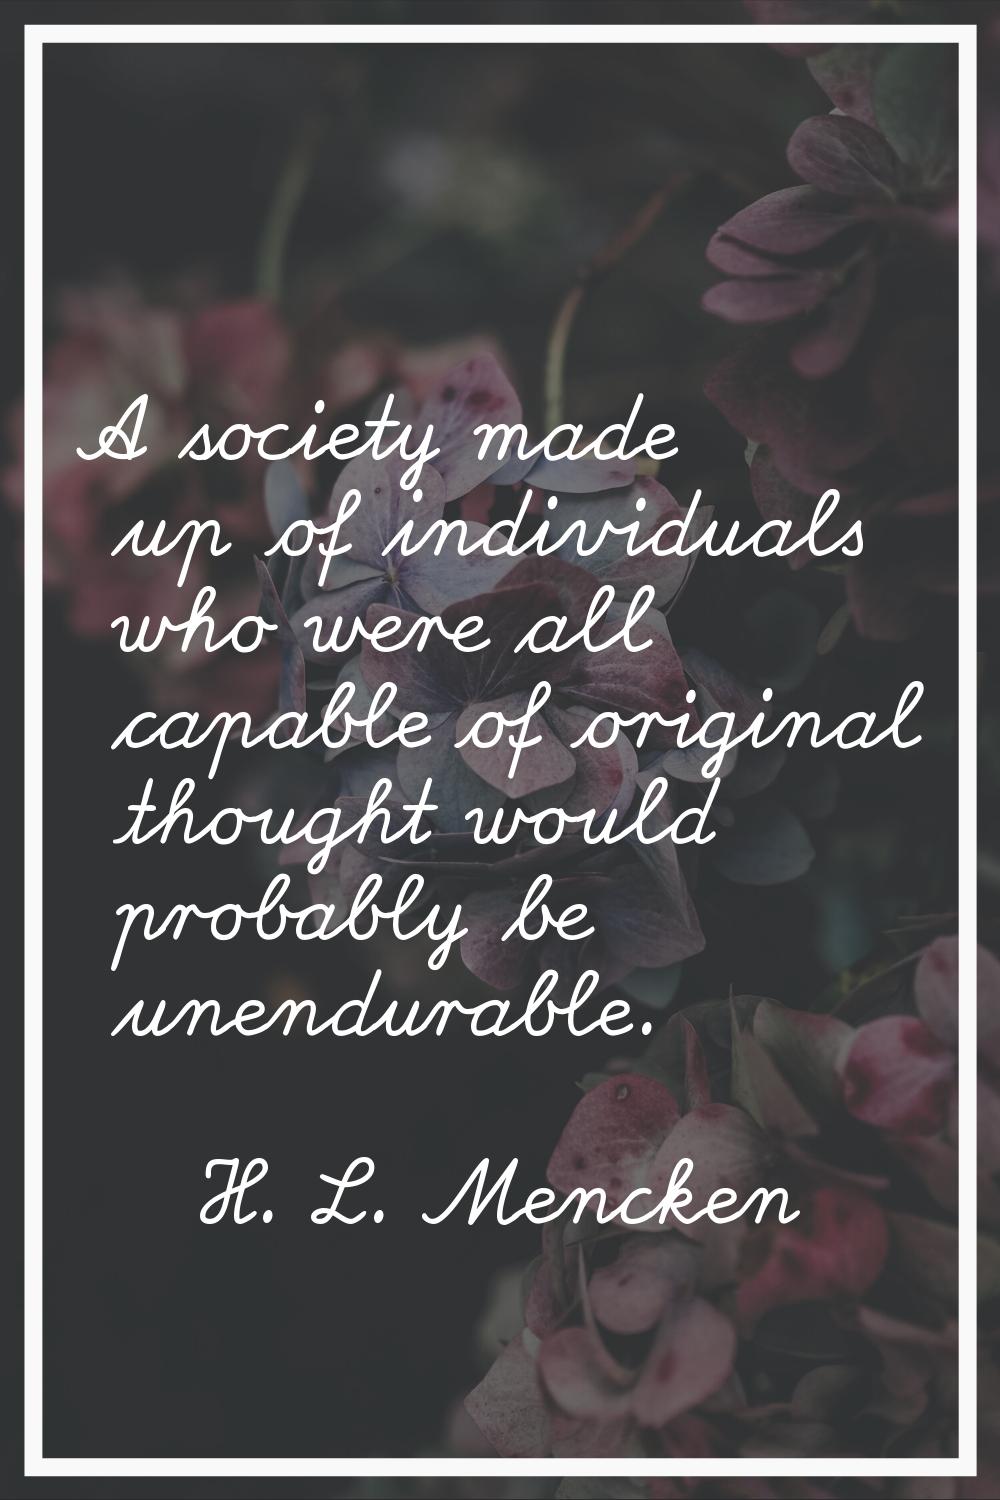 A society made up of individuals who were all capable of original thought would probably be unendur